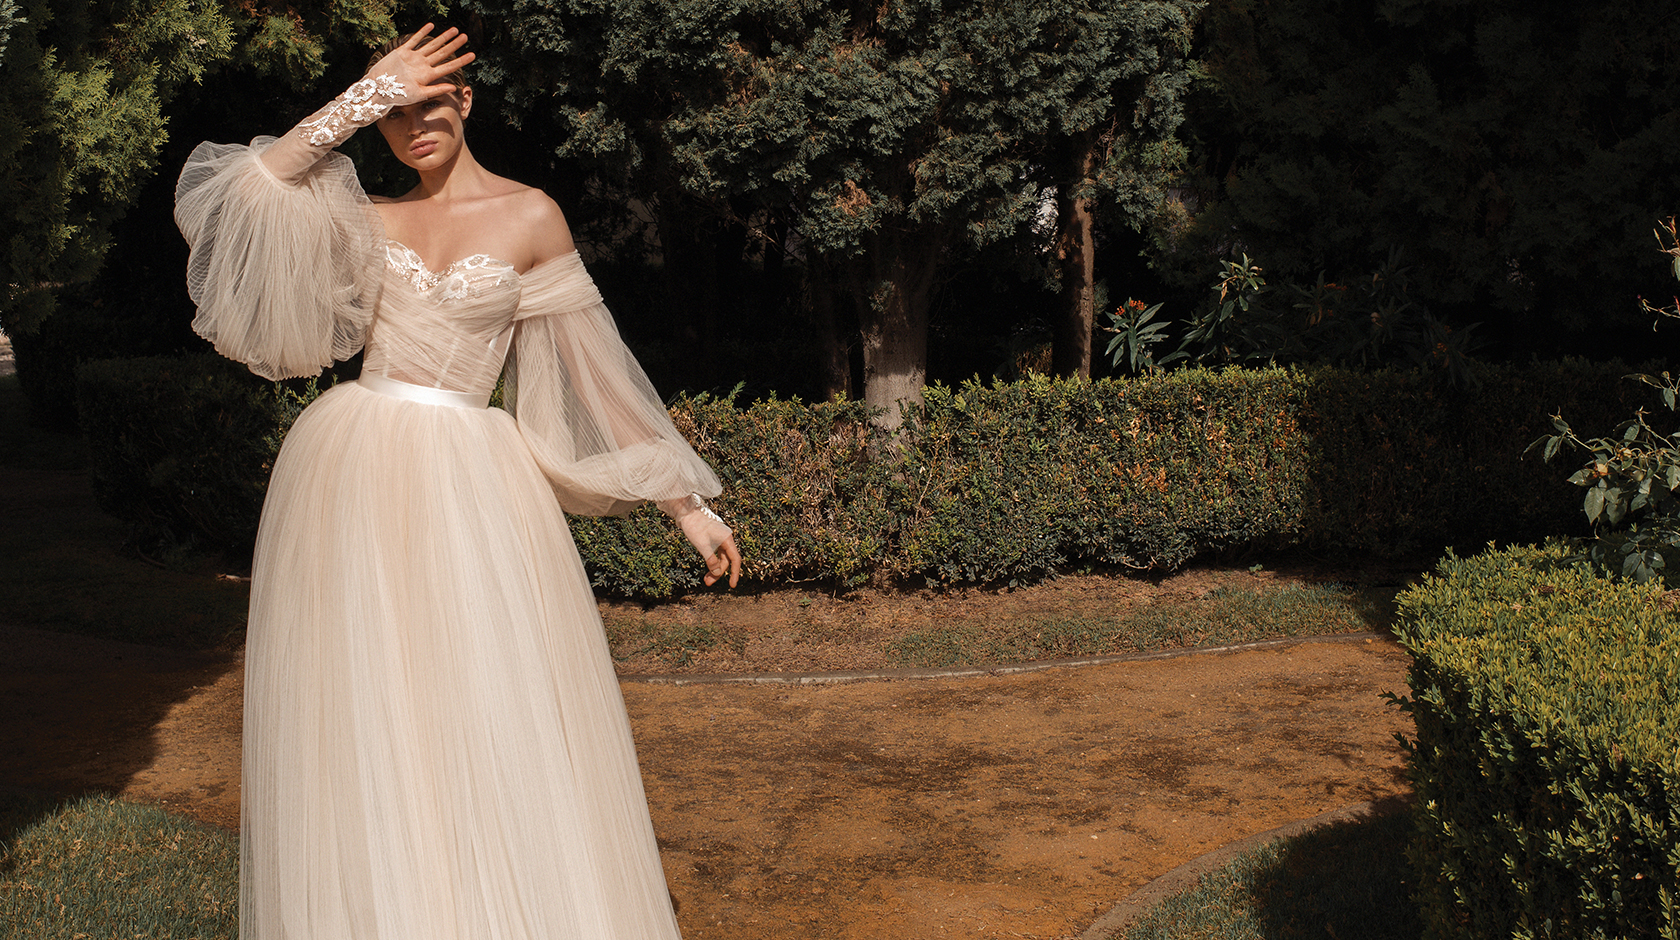 The Best Wedding Hairstyles to Style With Our Favorite Gowns! - Galia Lahav